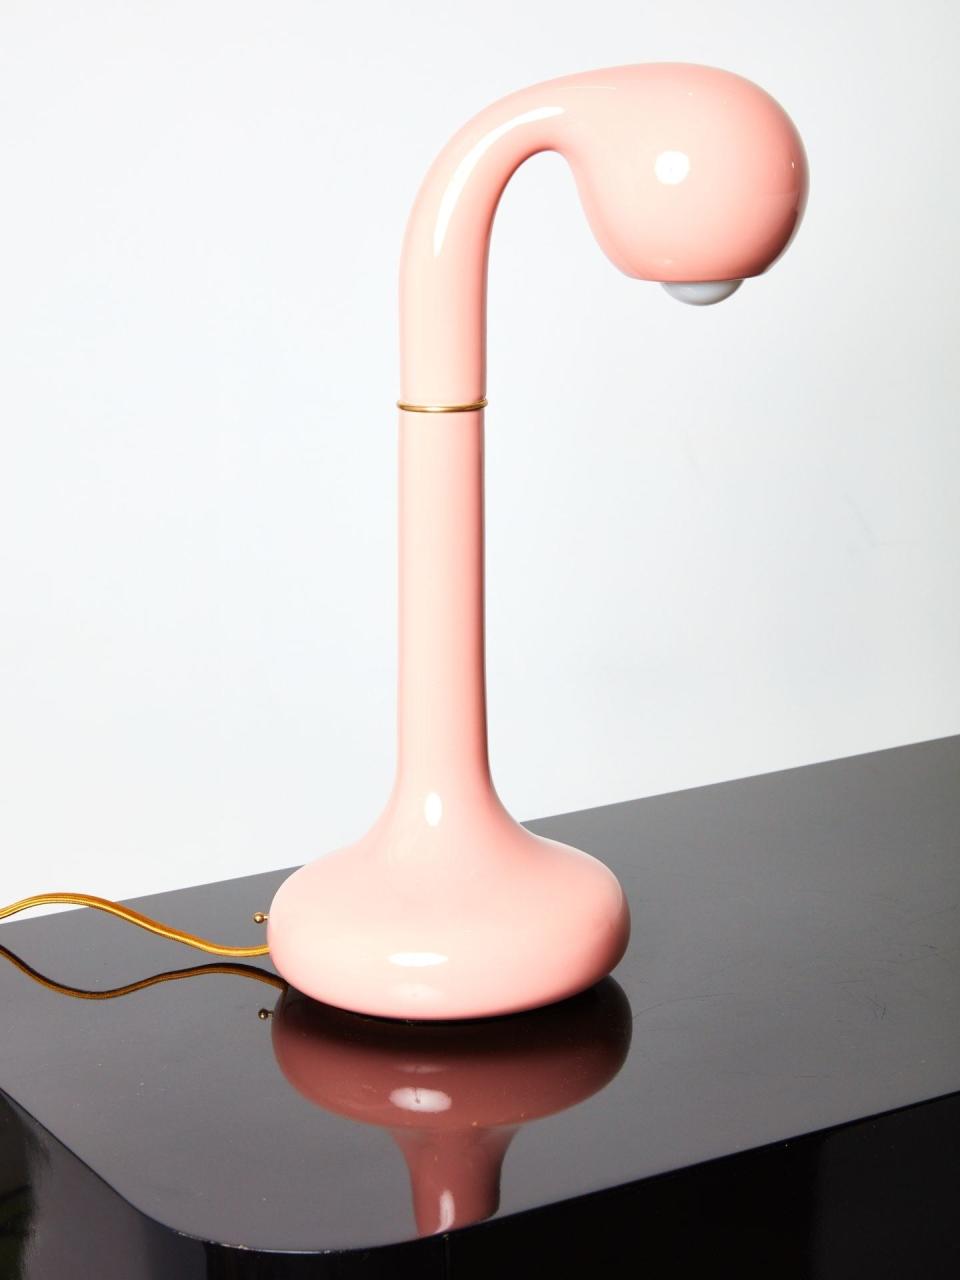 These Seussian table lamps will add welcome playfulness to your workspace. SHOP NOW: Tall table lamp by Entler Studio, $650, comingsoonnewyork.com